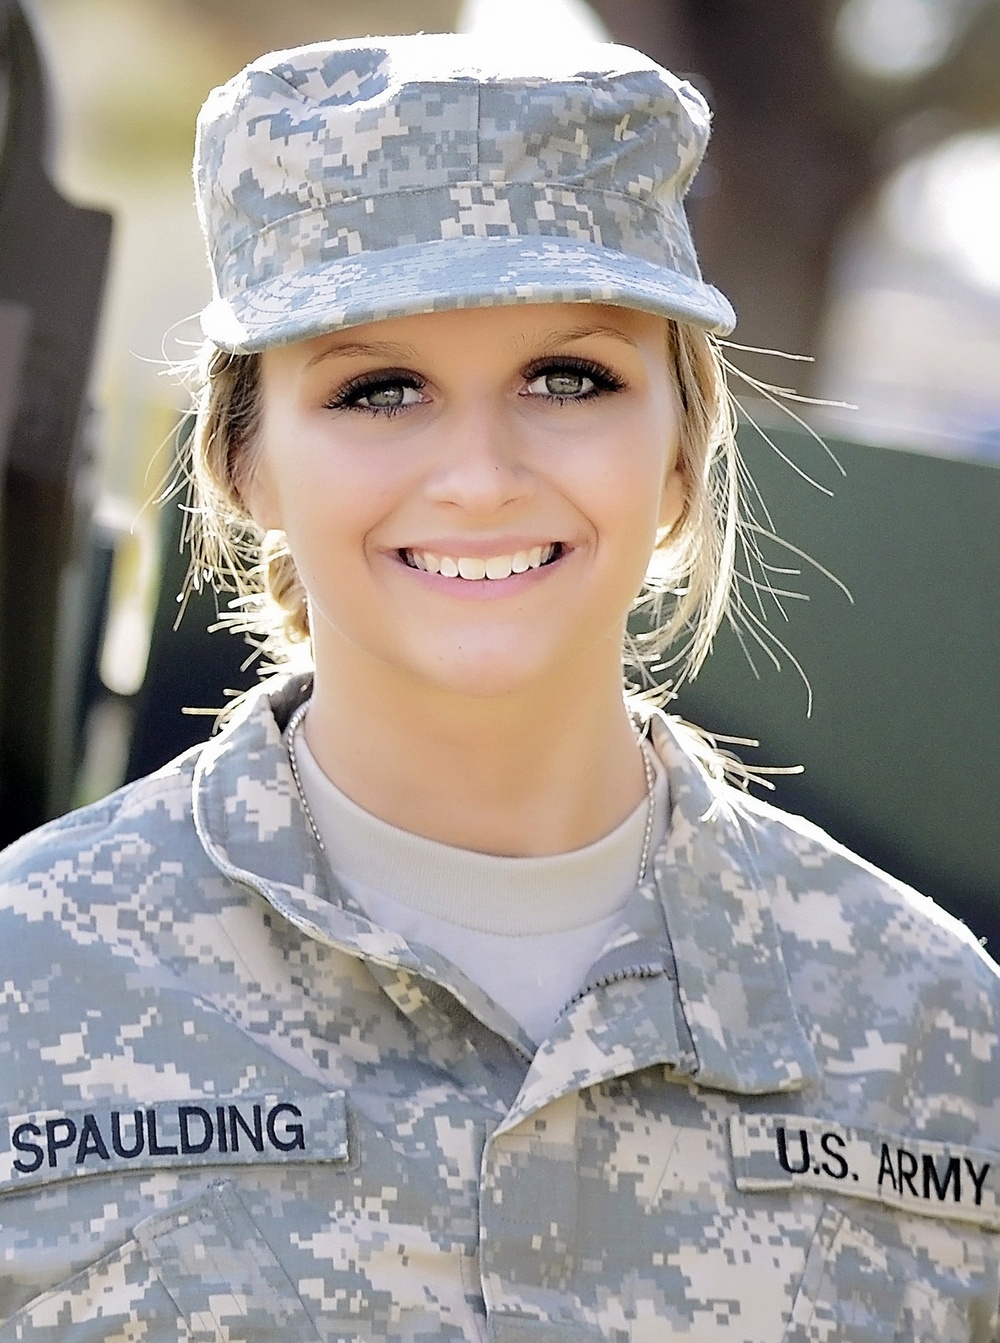 First woman to enlist in Iowa National Guard combat arms unit